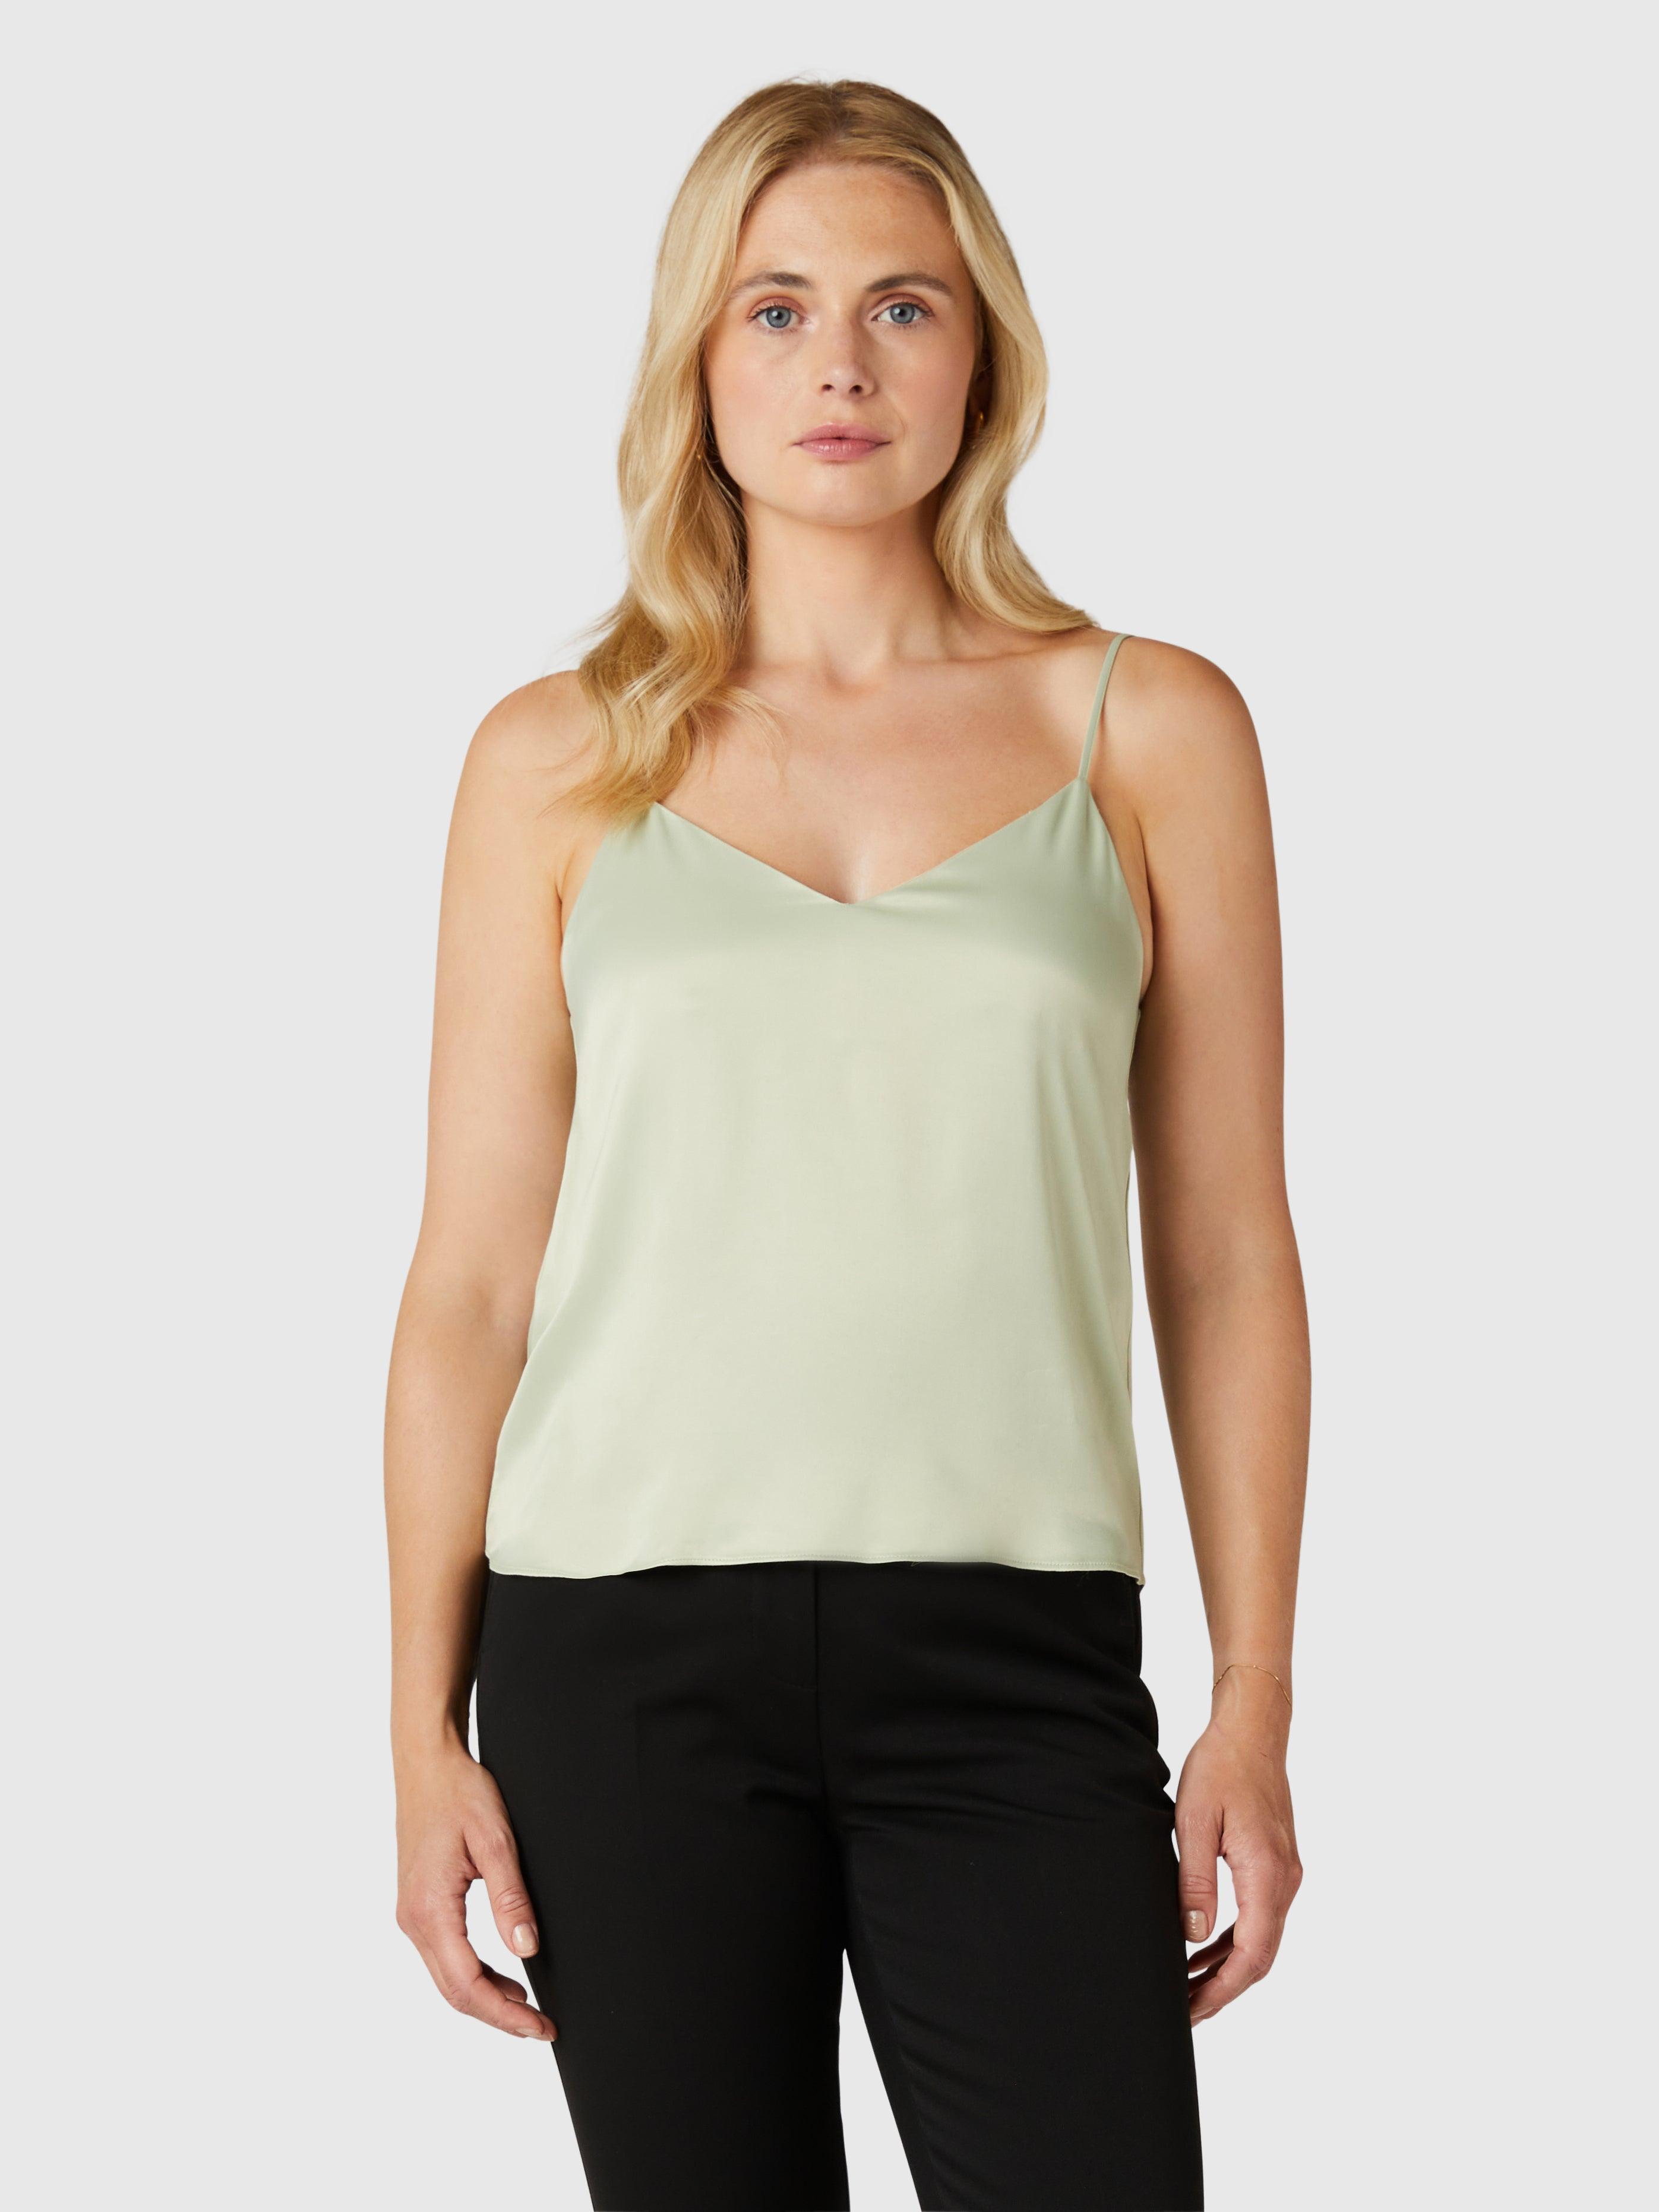 Cami Top For Women